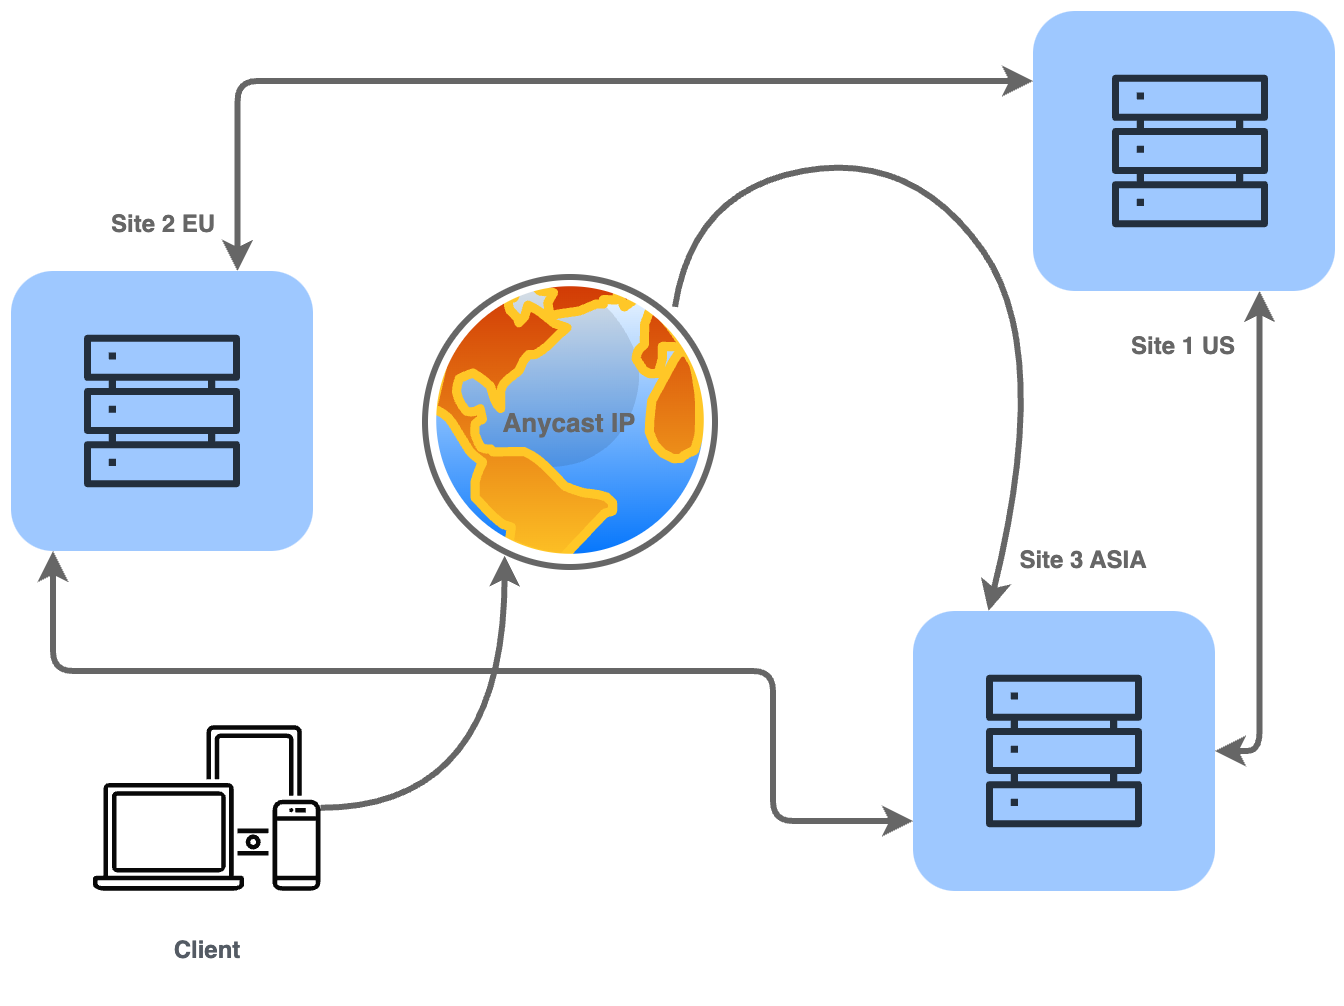 Distributed server solution with multiple sites and anycast solution